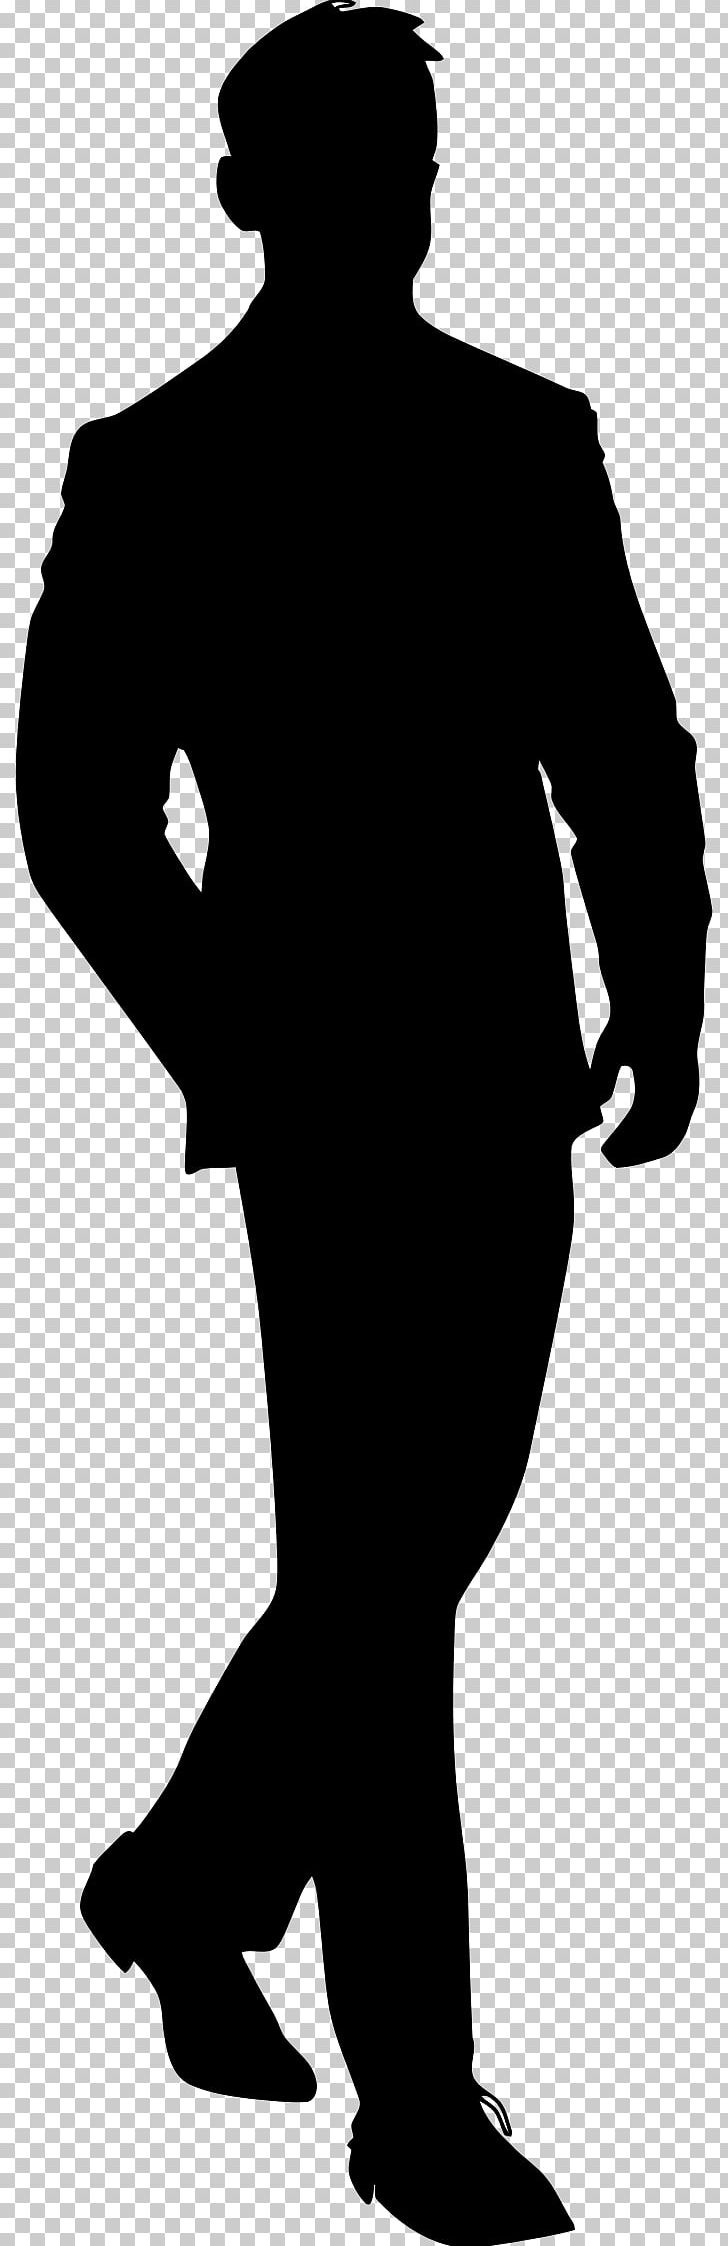 Suit Silhouette PNG, Clipart, Black, Black And White, Clip Art, Clothing, Computer Icons Free PNG Download